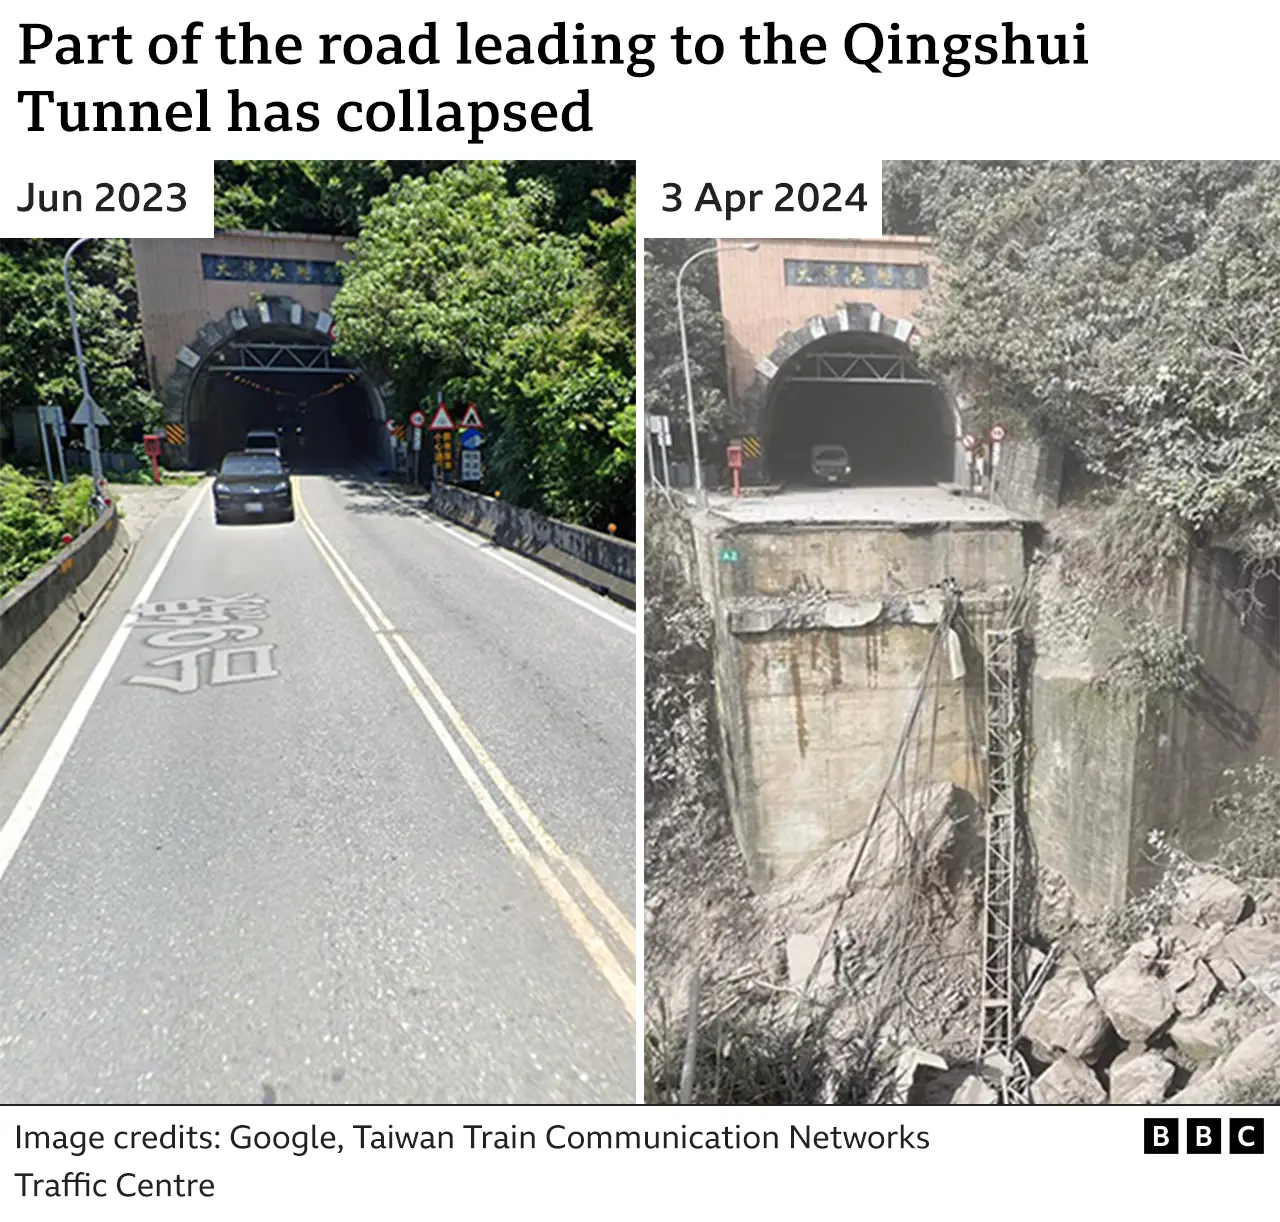 Composite image shows part of the road leading to the Qingshui Tunnel collapsed